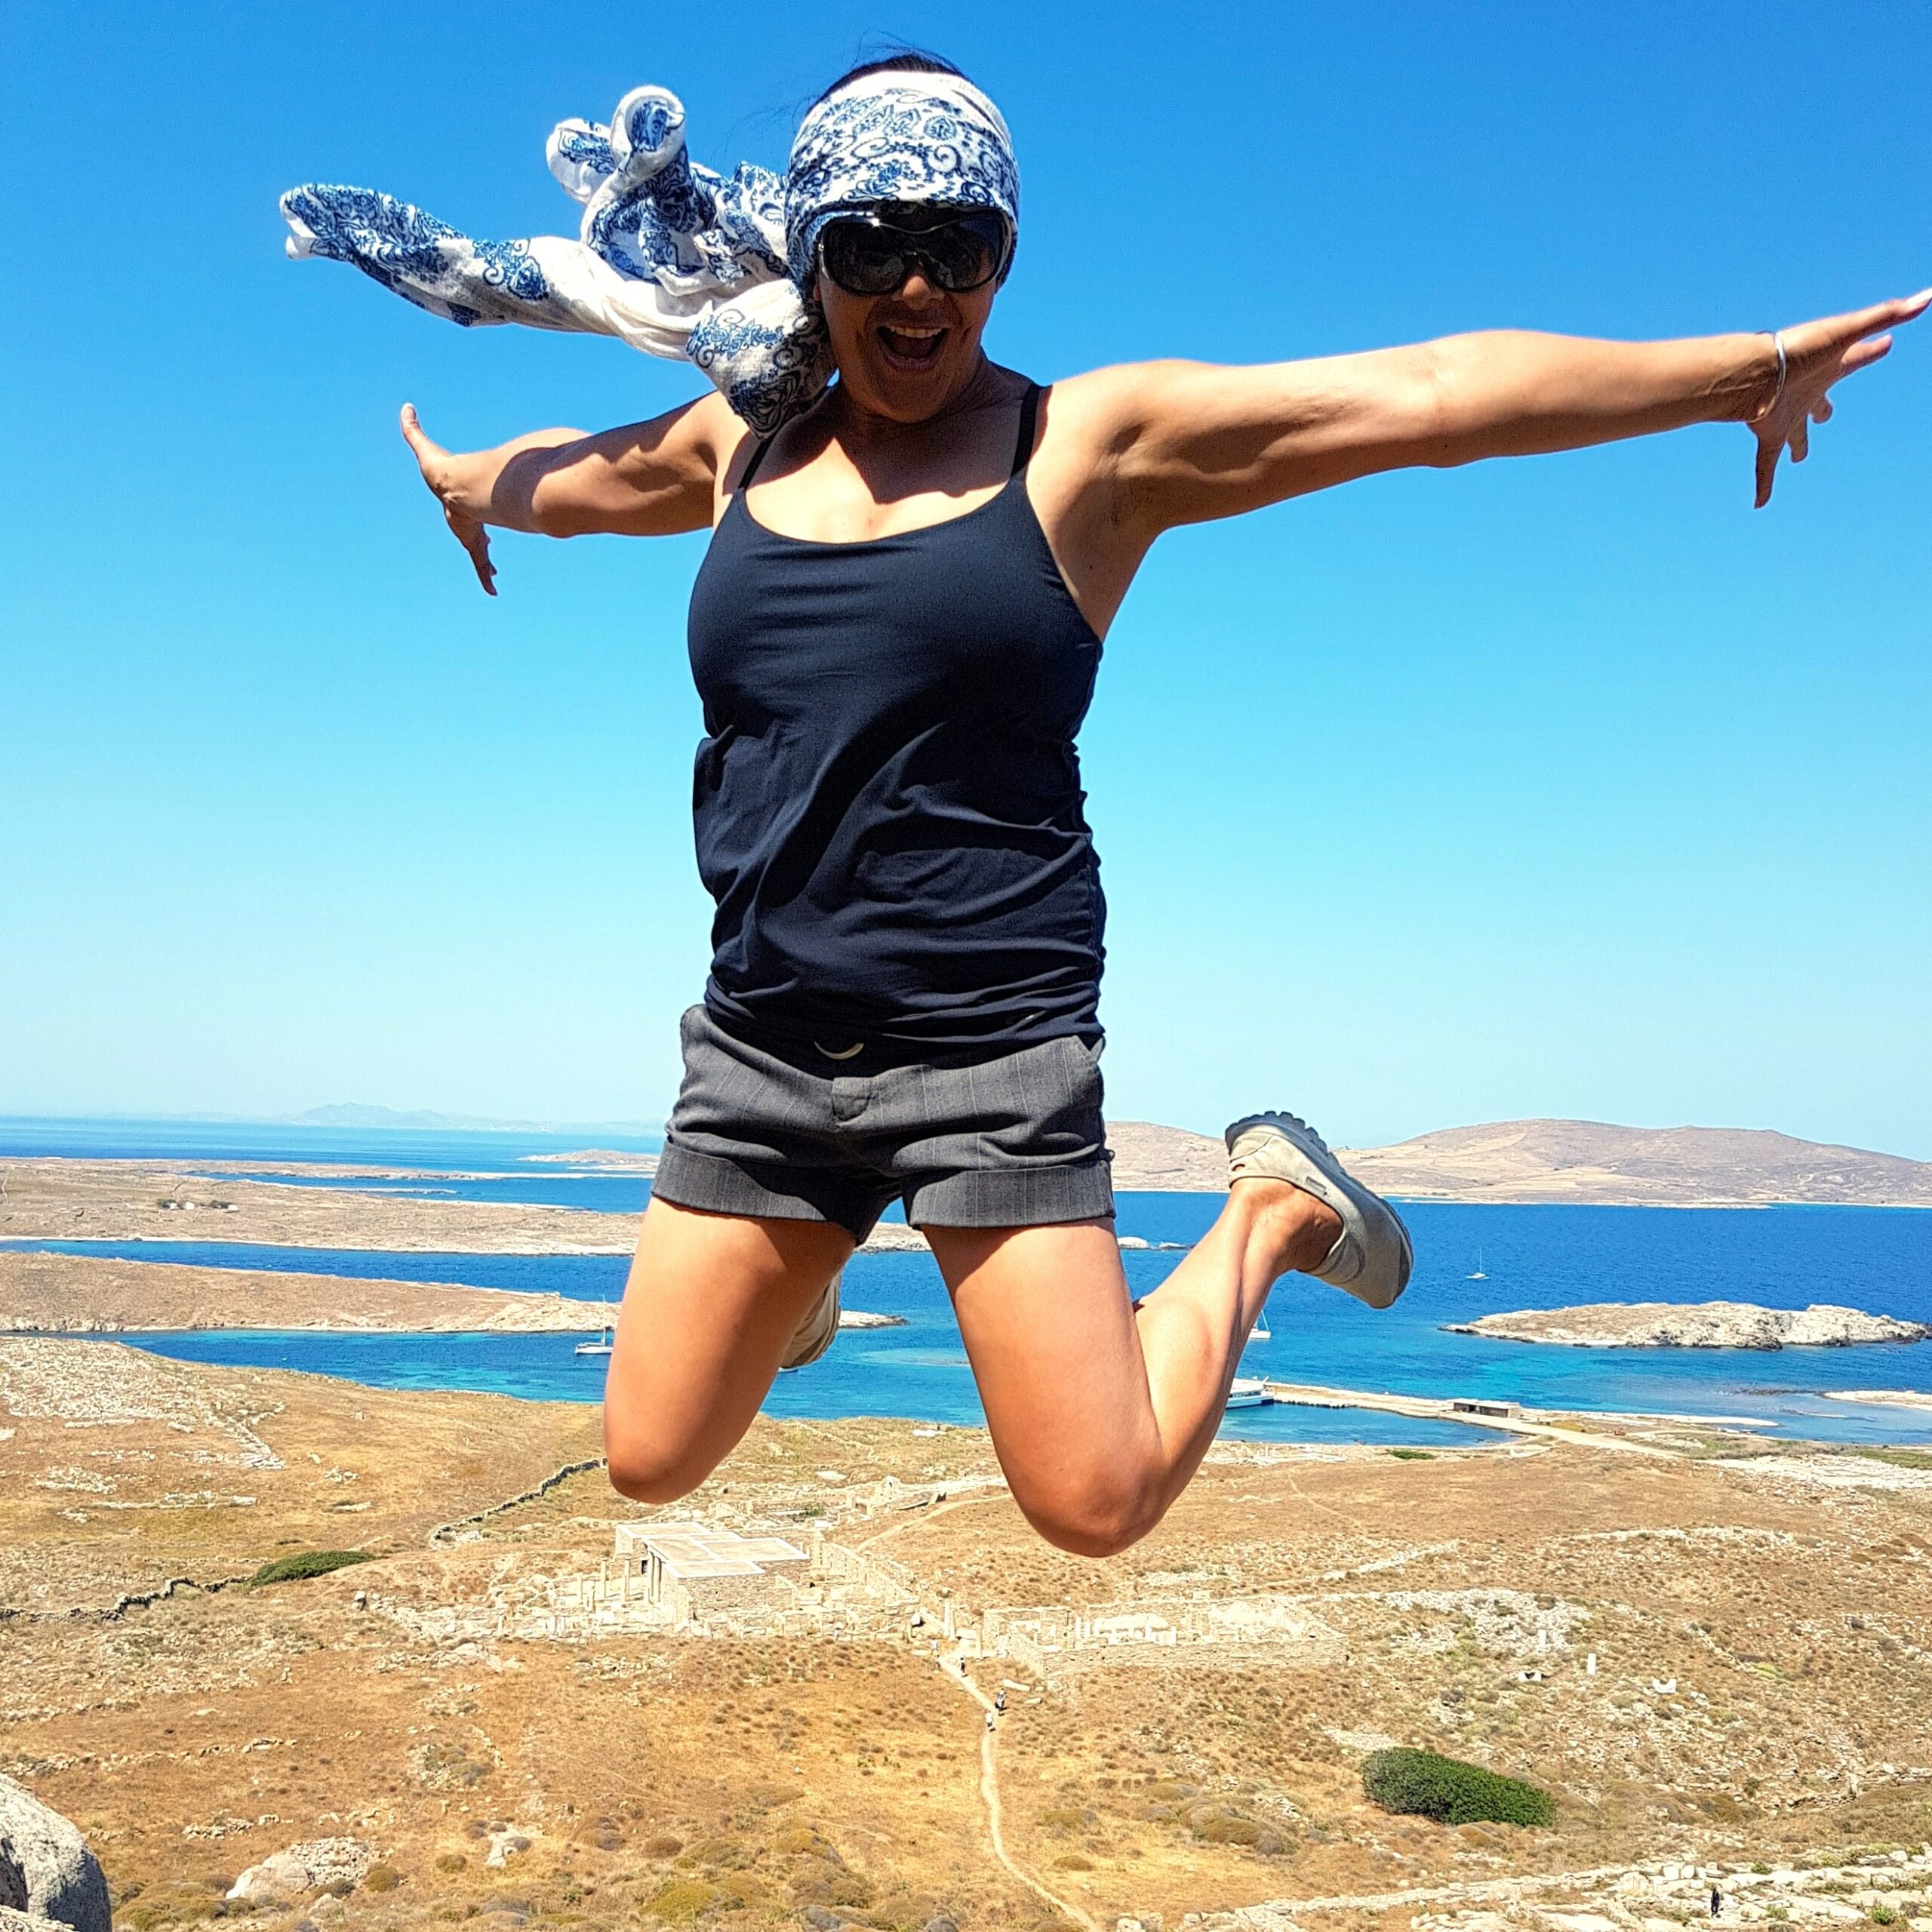 Leaping in Greece!